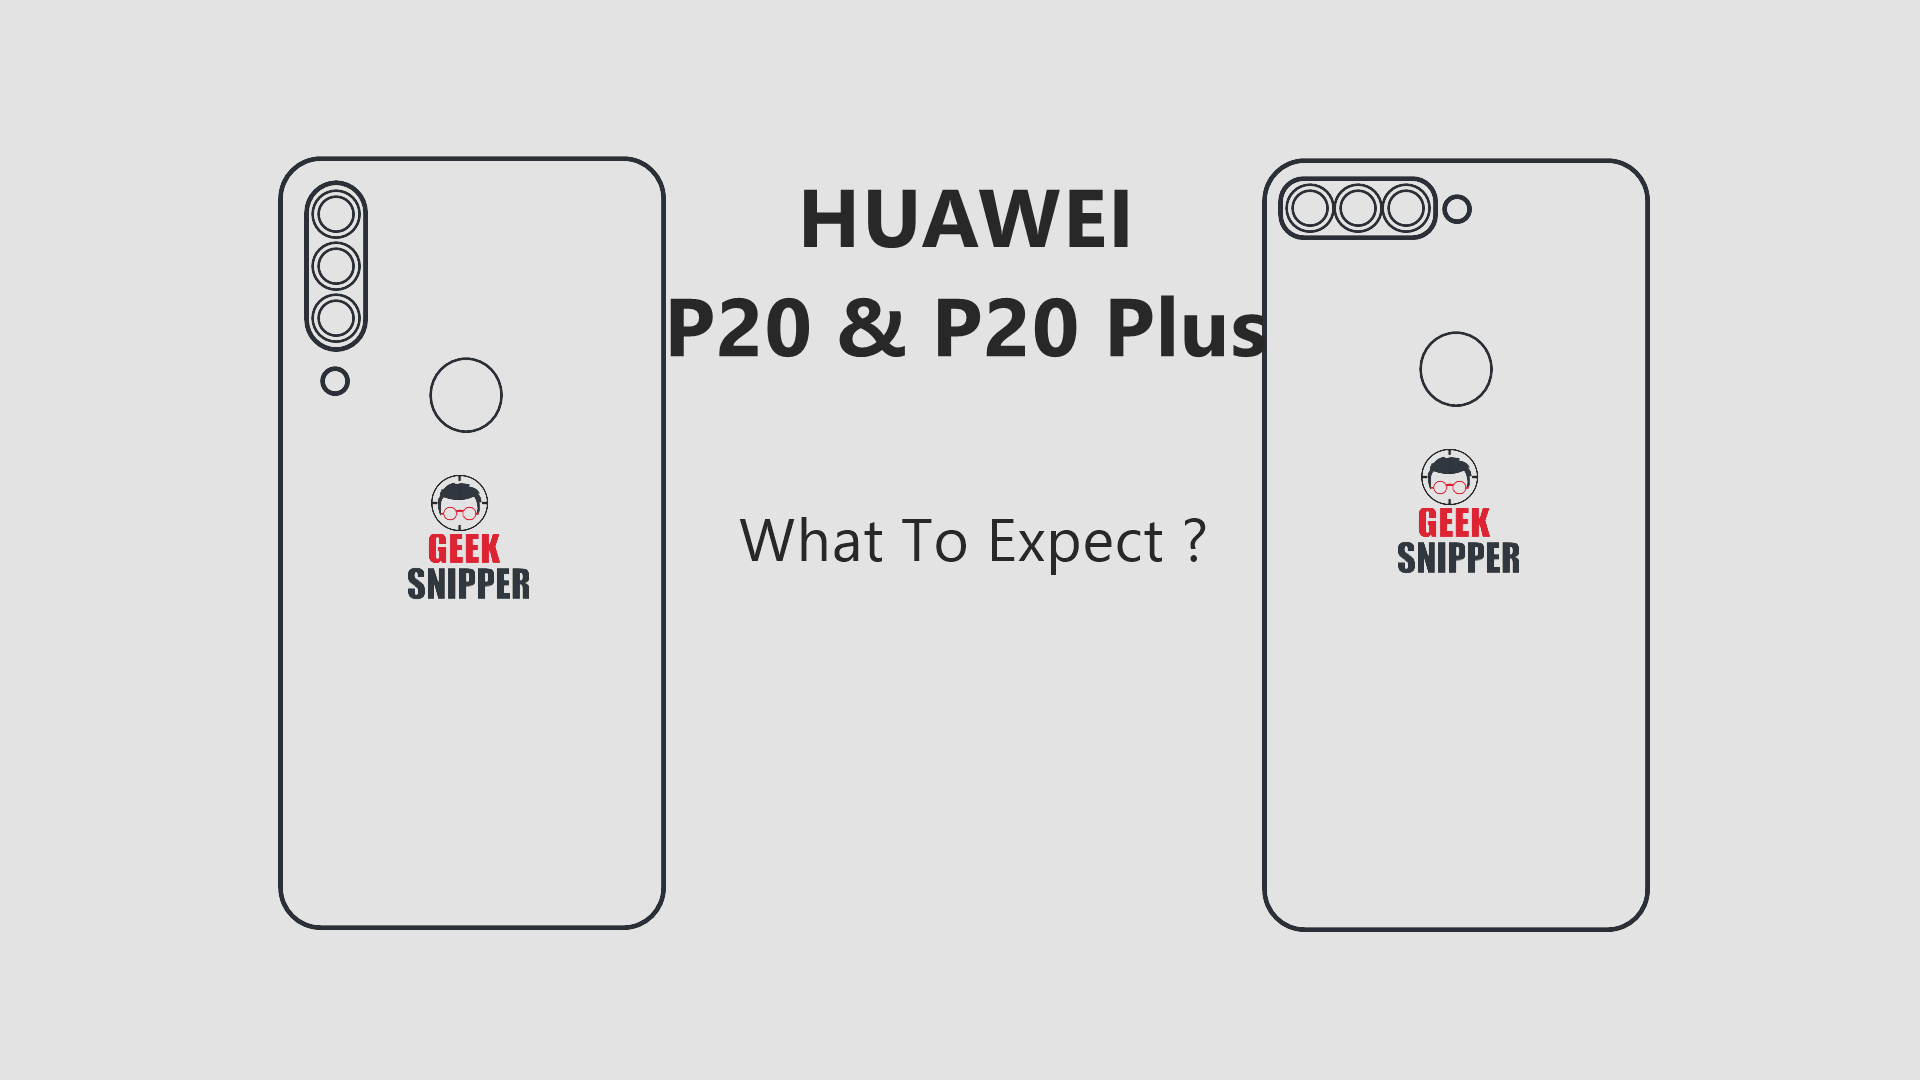 Huawei P20 And P20 Plus - What To Expect